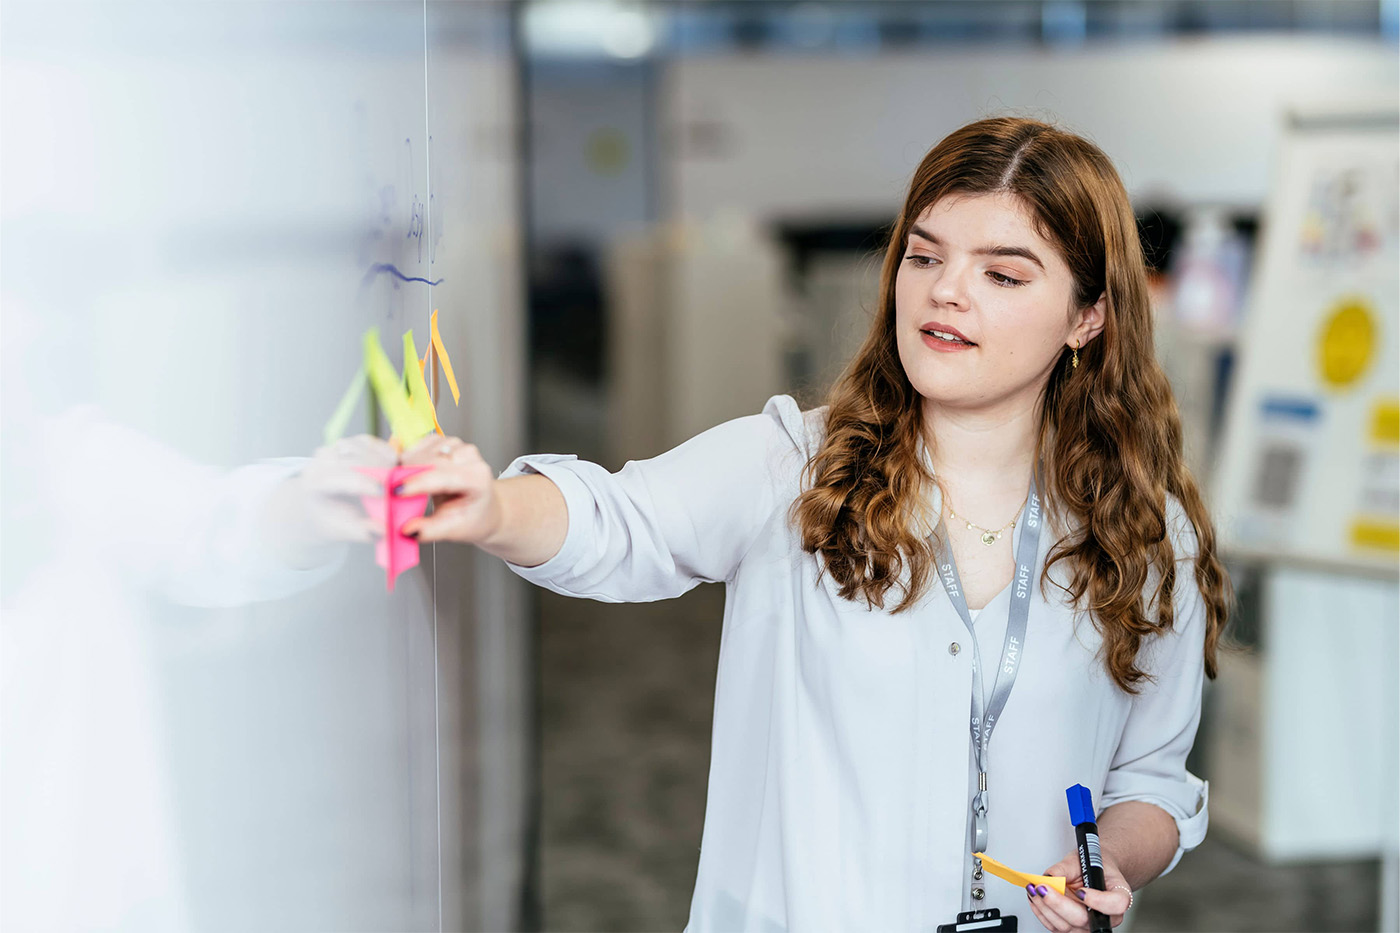 Woman at work displaying post-it notes on a whiteboard